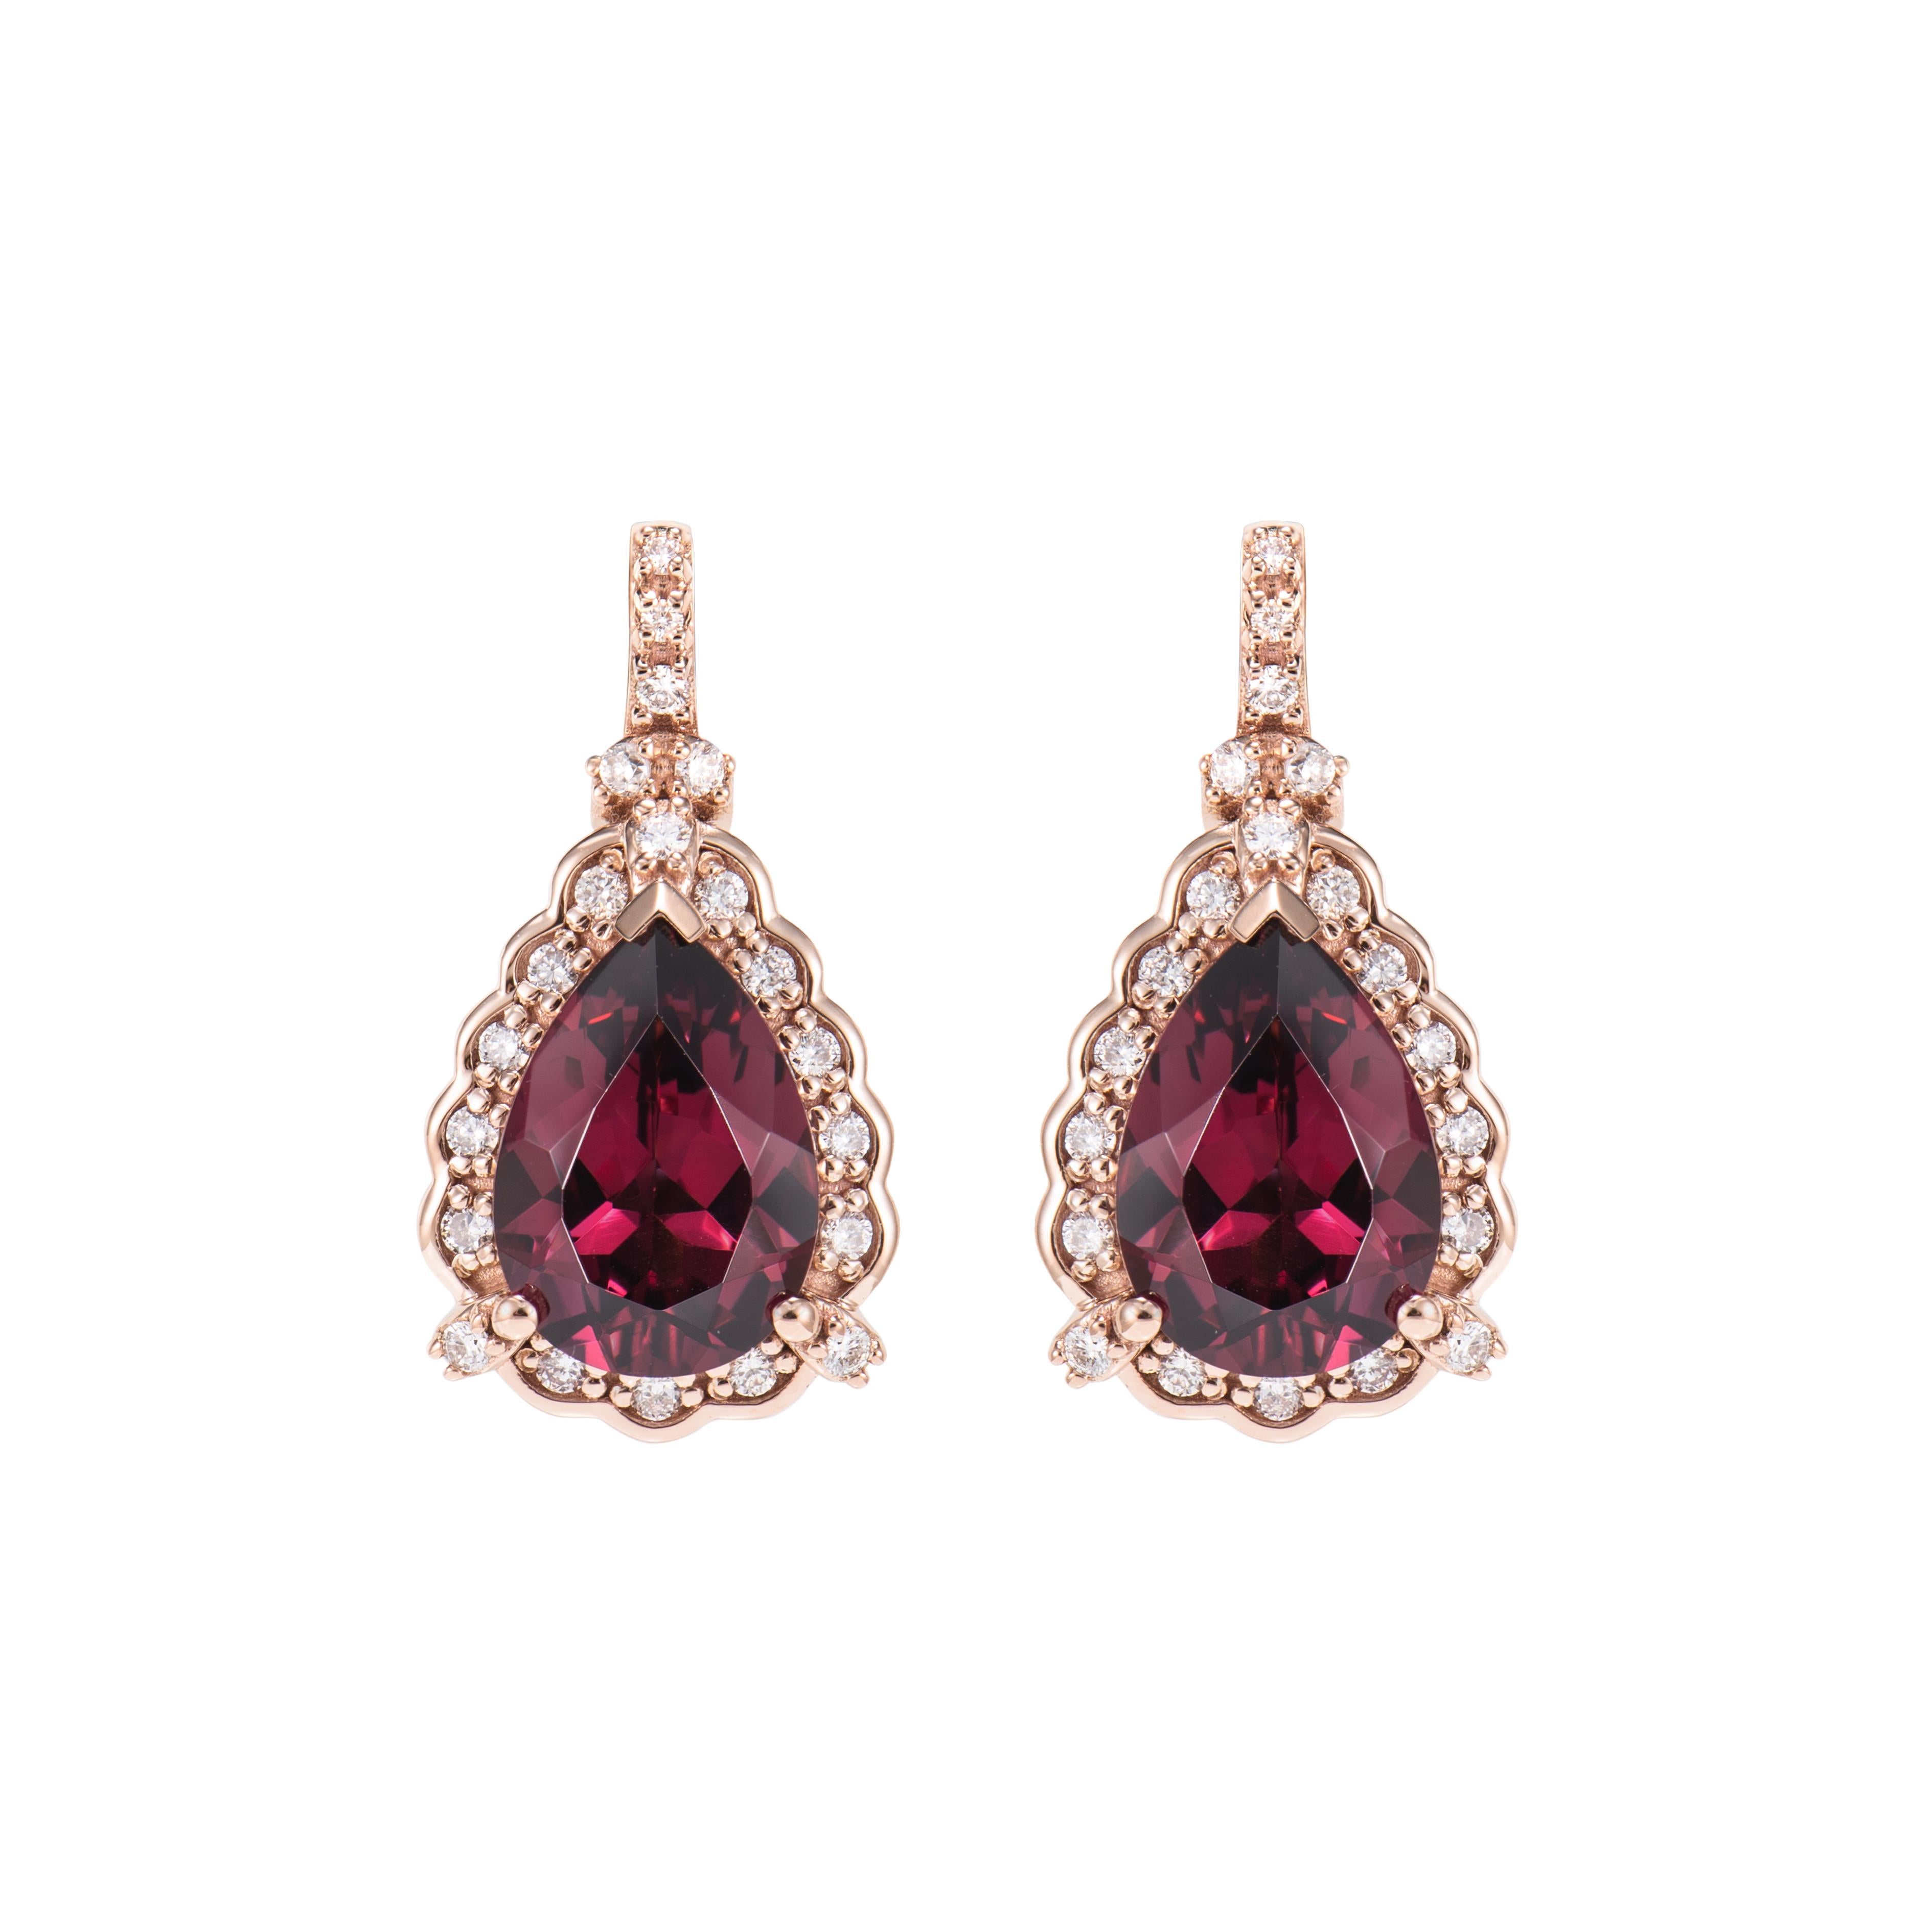 Contemporary 4.49 Carat Rhodolite Drop Earring in 18Karat Rose Gold with White Diamond For Sale